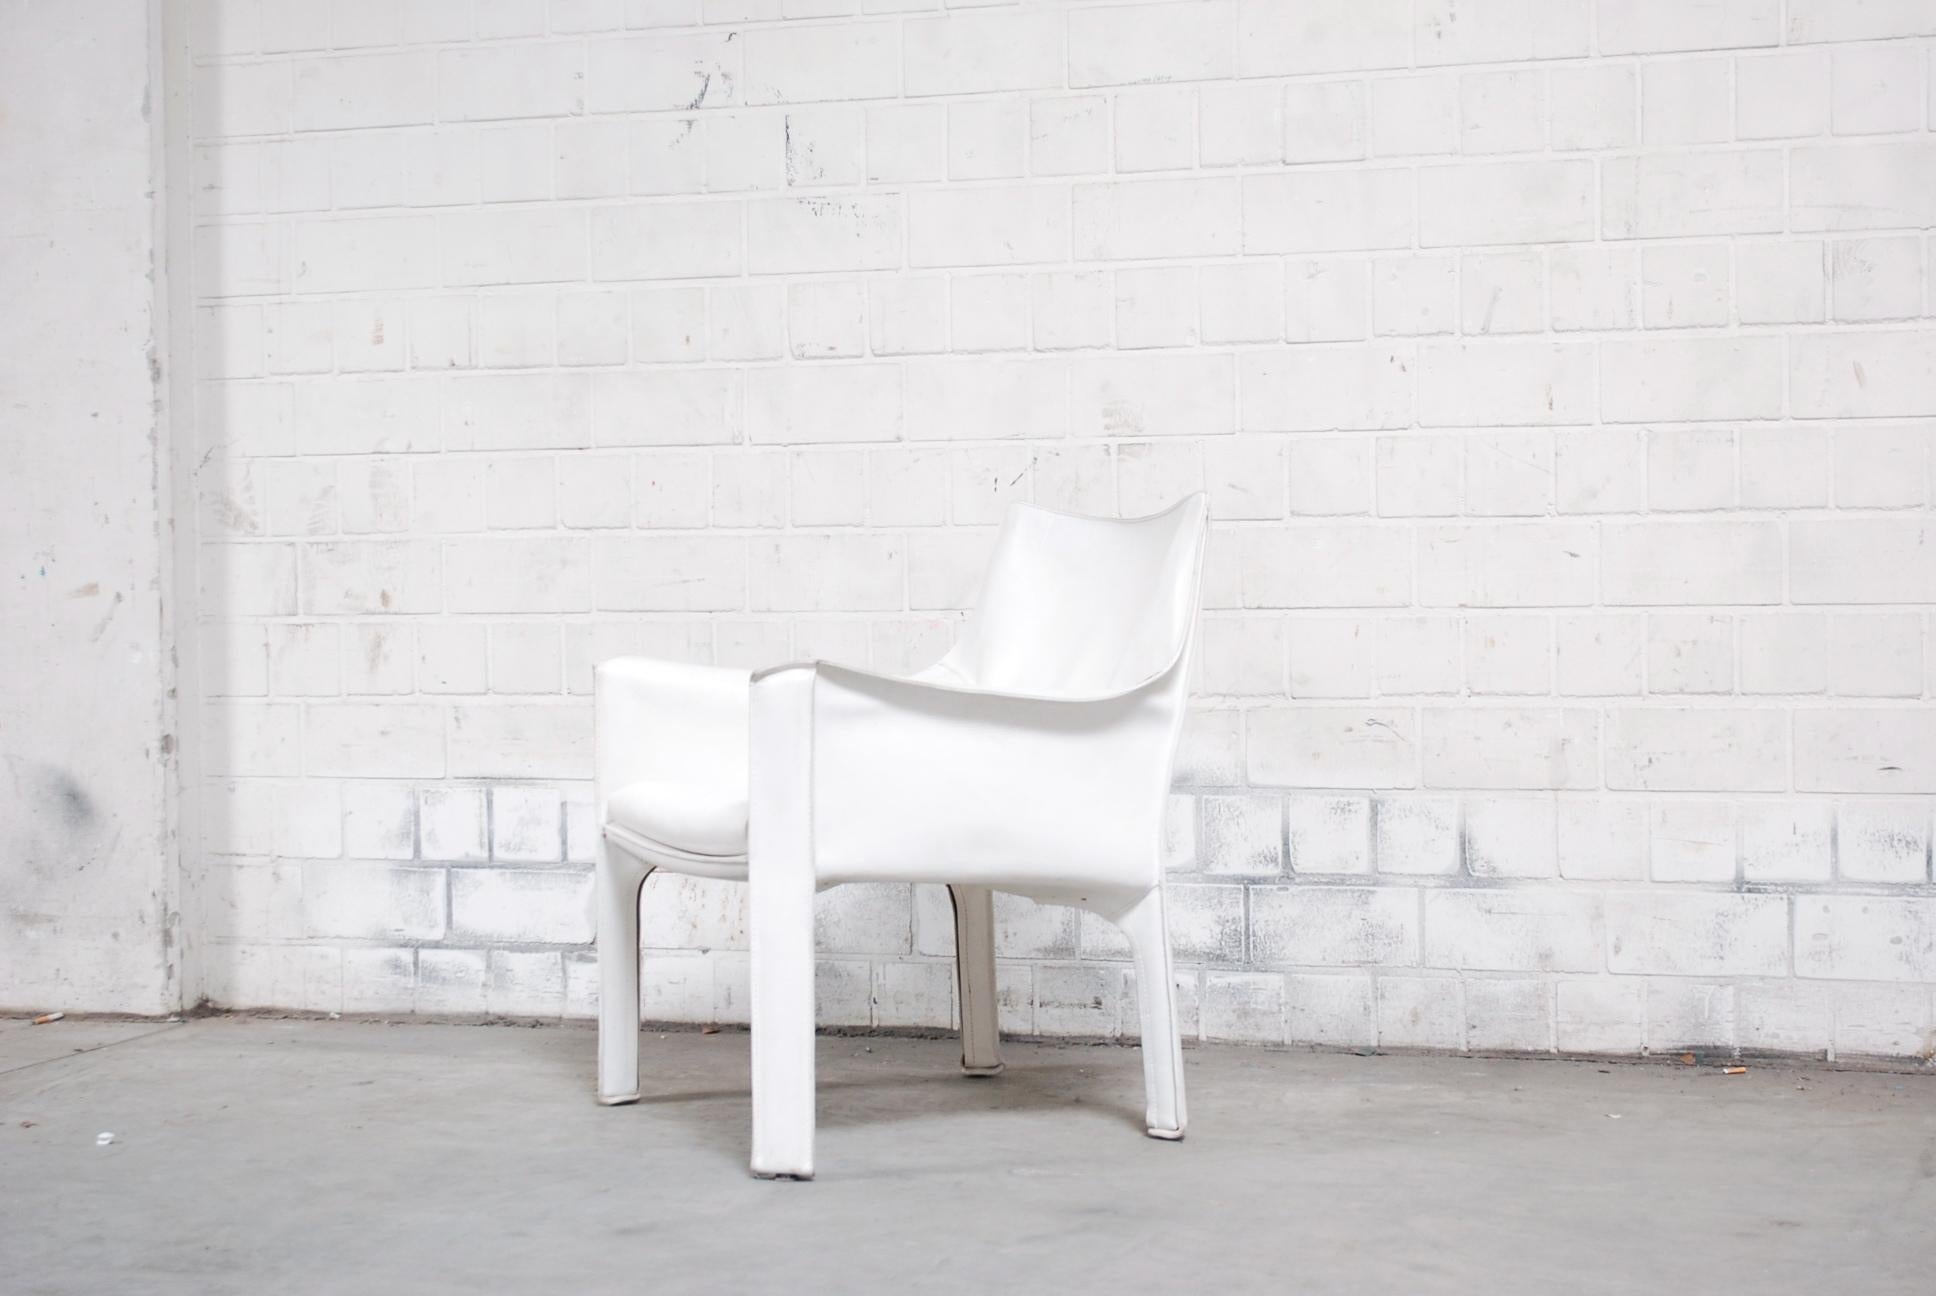 This cab 414 armchair was designed by Mario Bellini for Italian manufacturer Cassina.
It's the armchair version with comfortable seat padding.
It is upholstered in thick saddle leather, colour off white

We have 4 white cab chairs in stock.